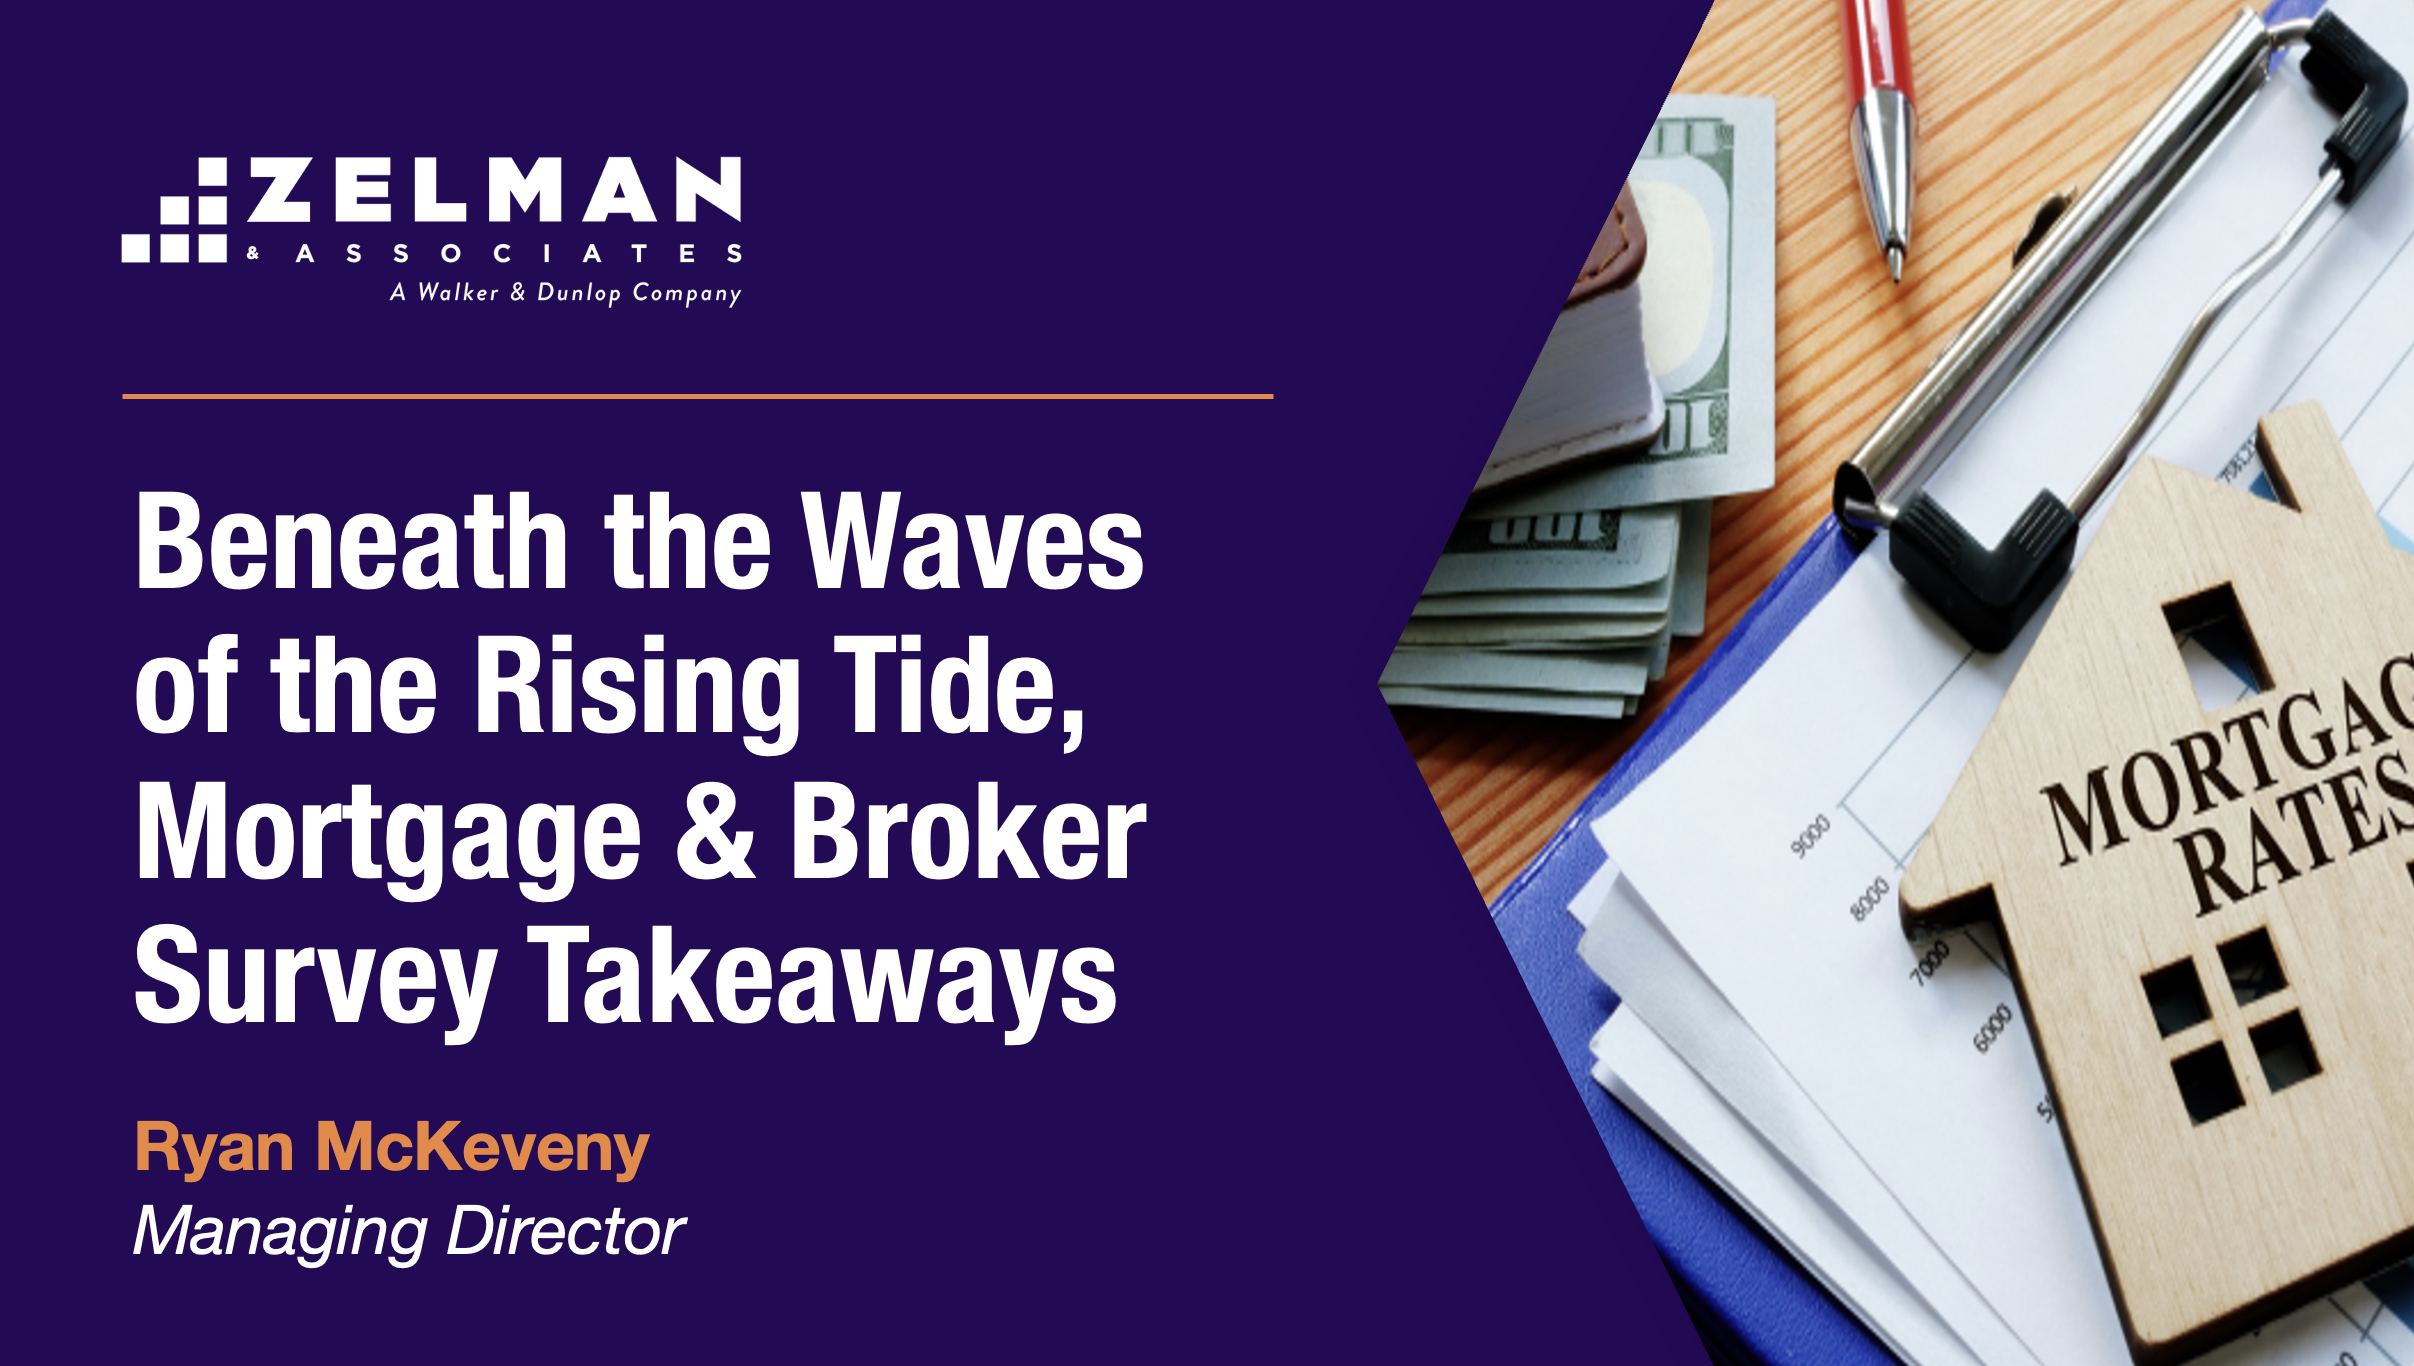 Beneath the Waves of the Rising Tide, Mortgage & Real Estate Services Update